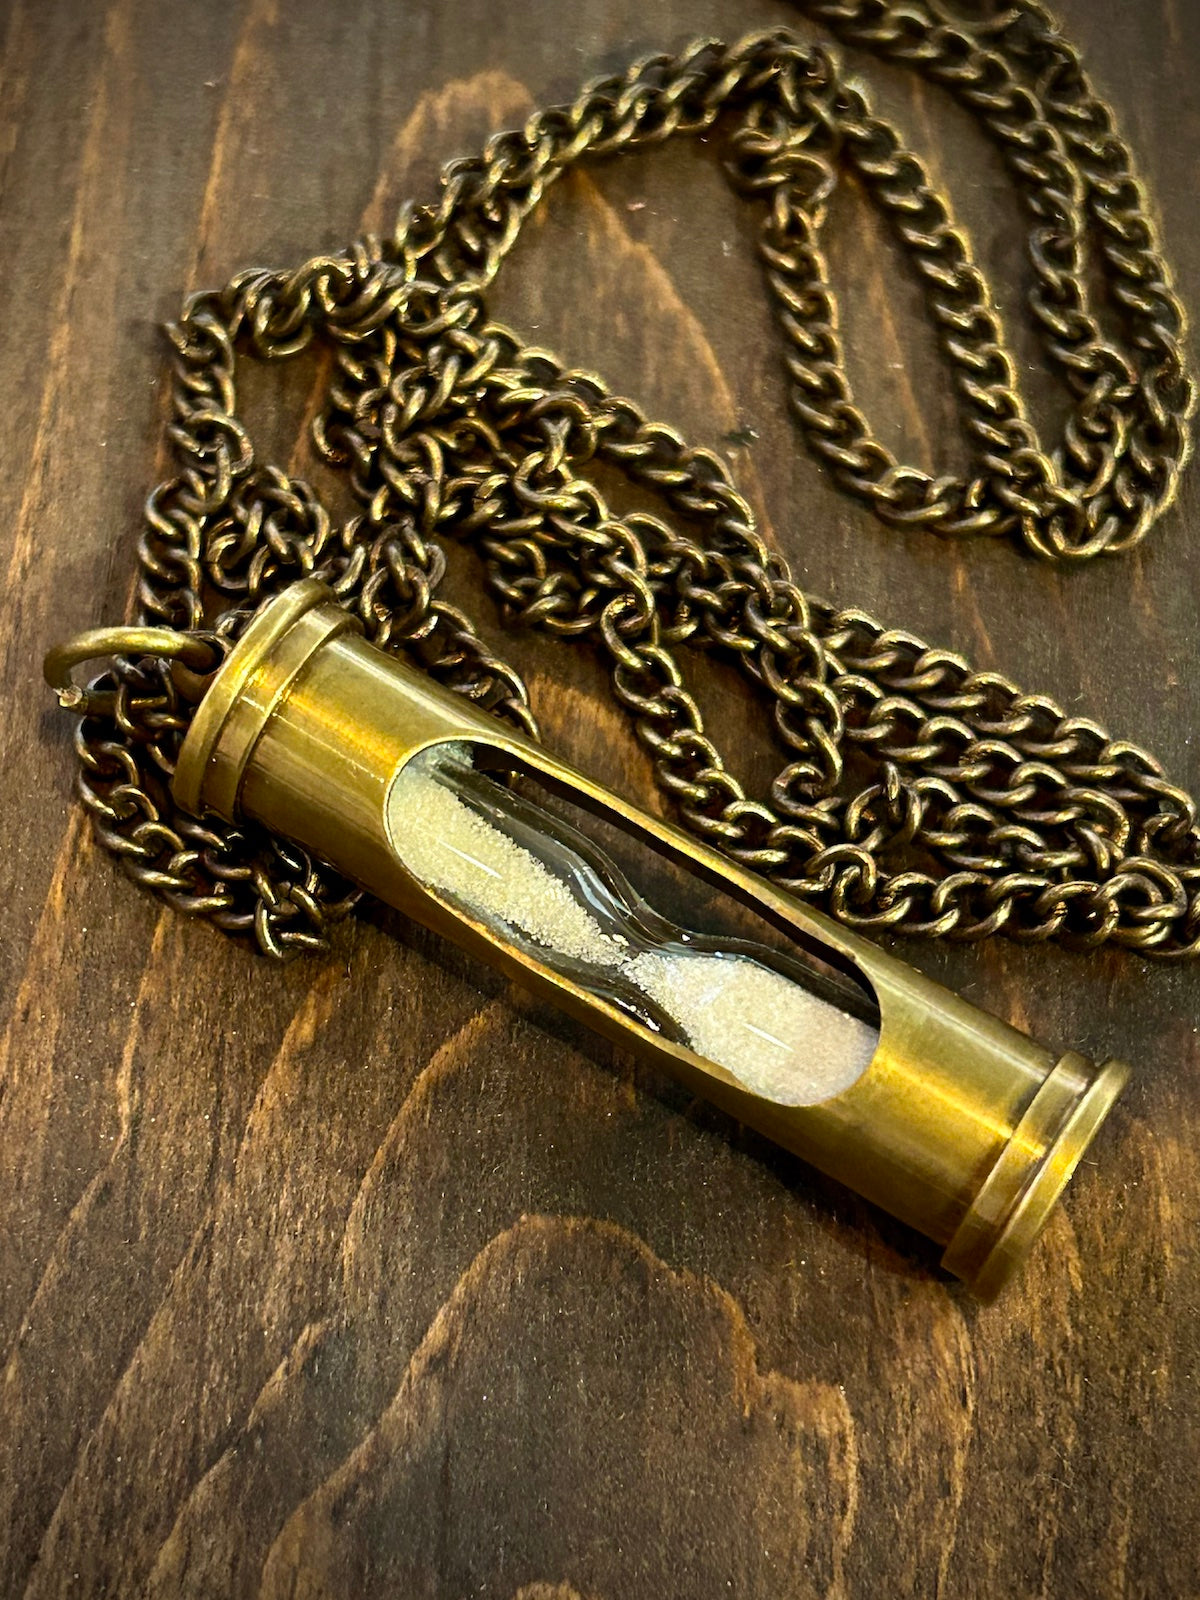 Antiqued Brass Hourglass Necklace